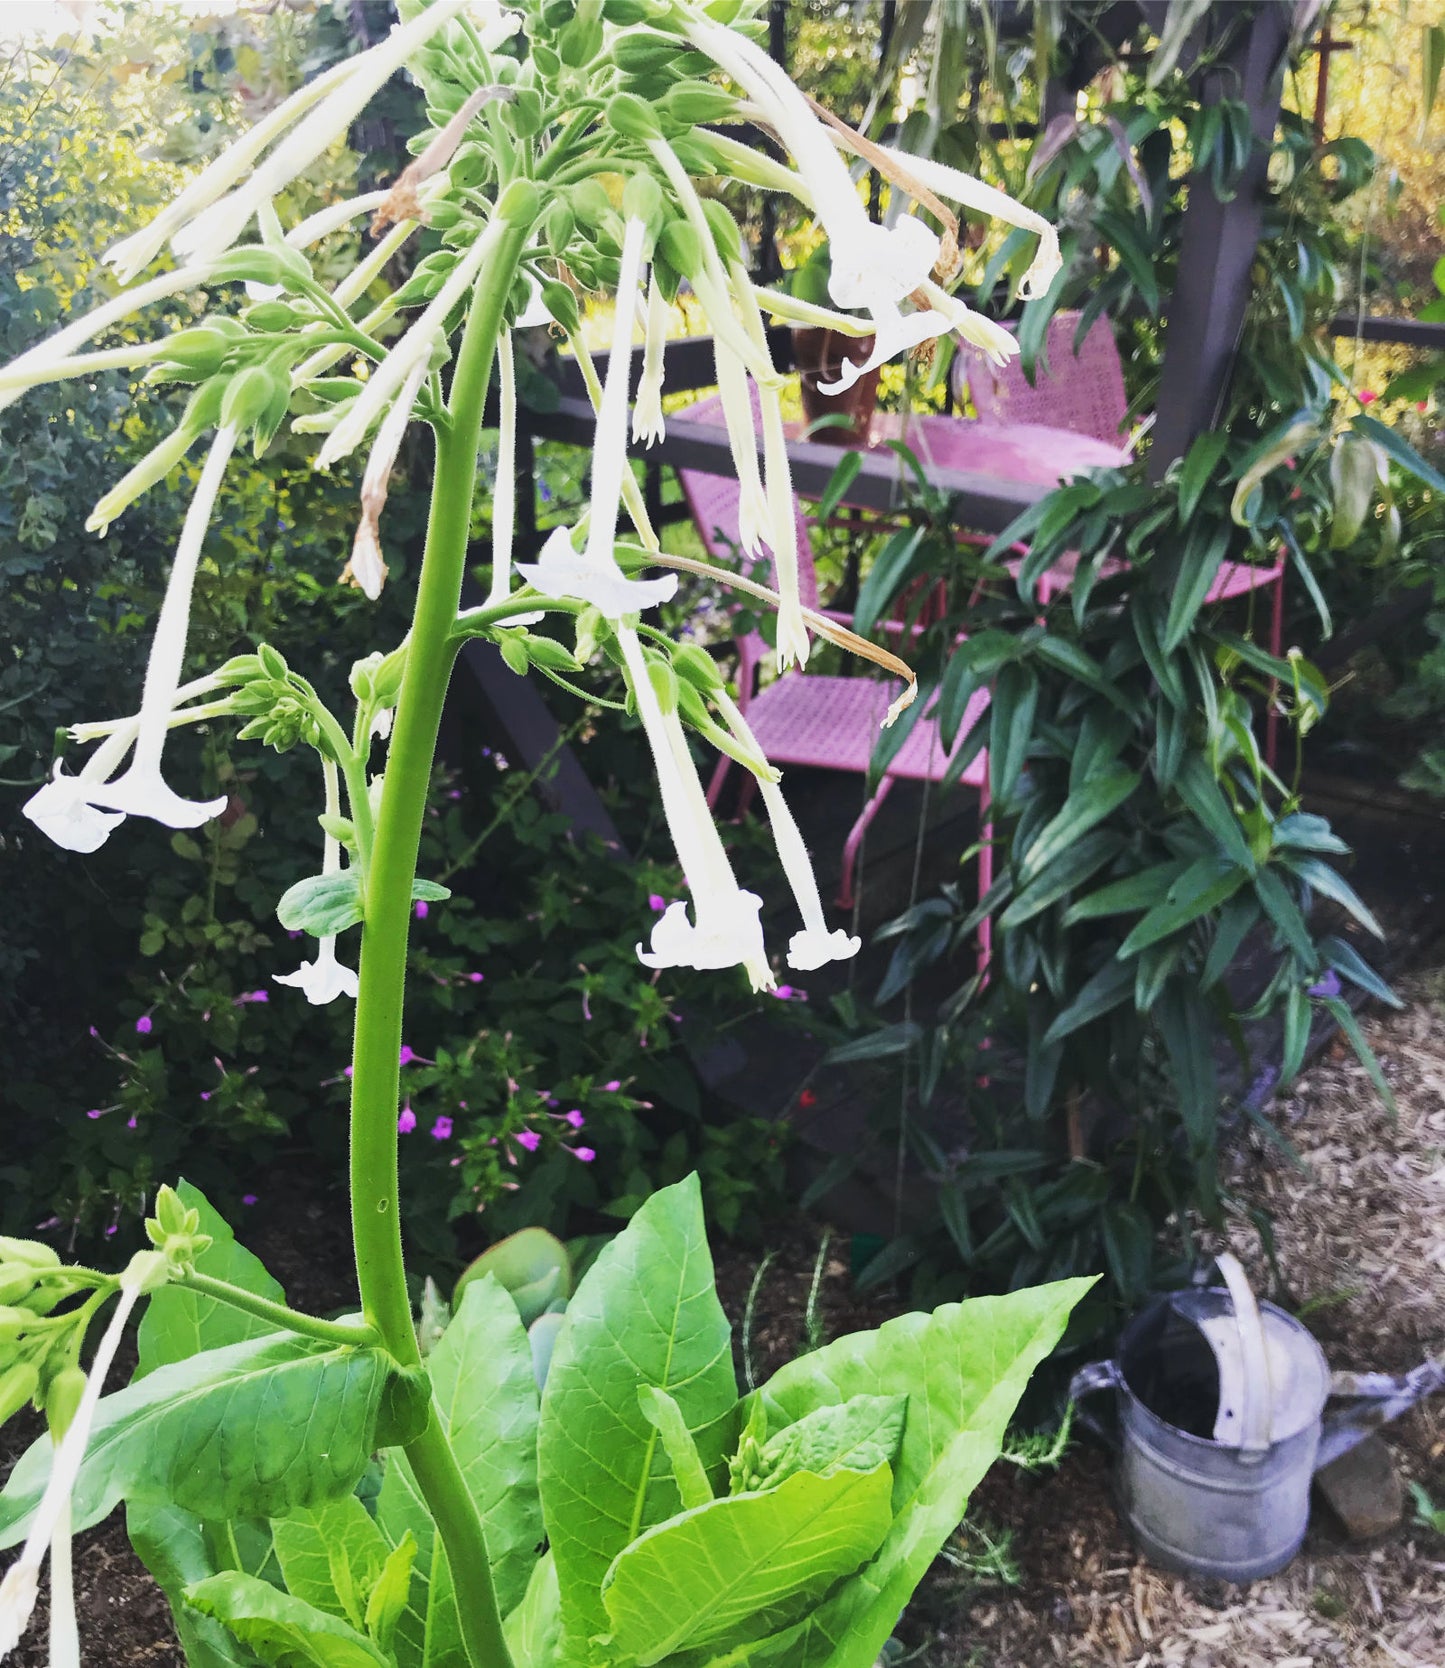 Indian Peace Pipes Nicotiana